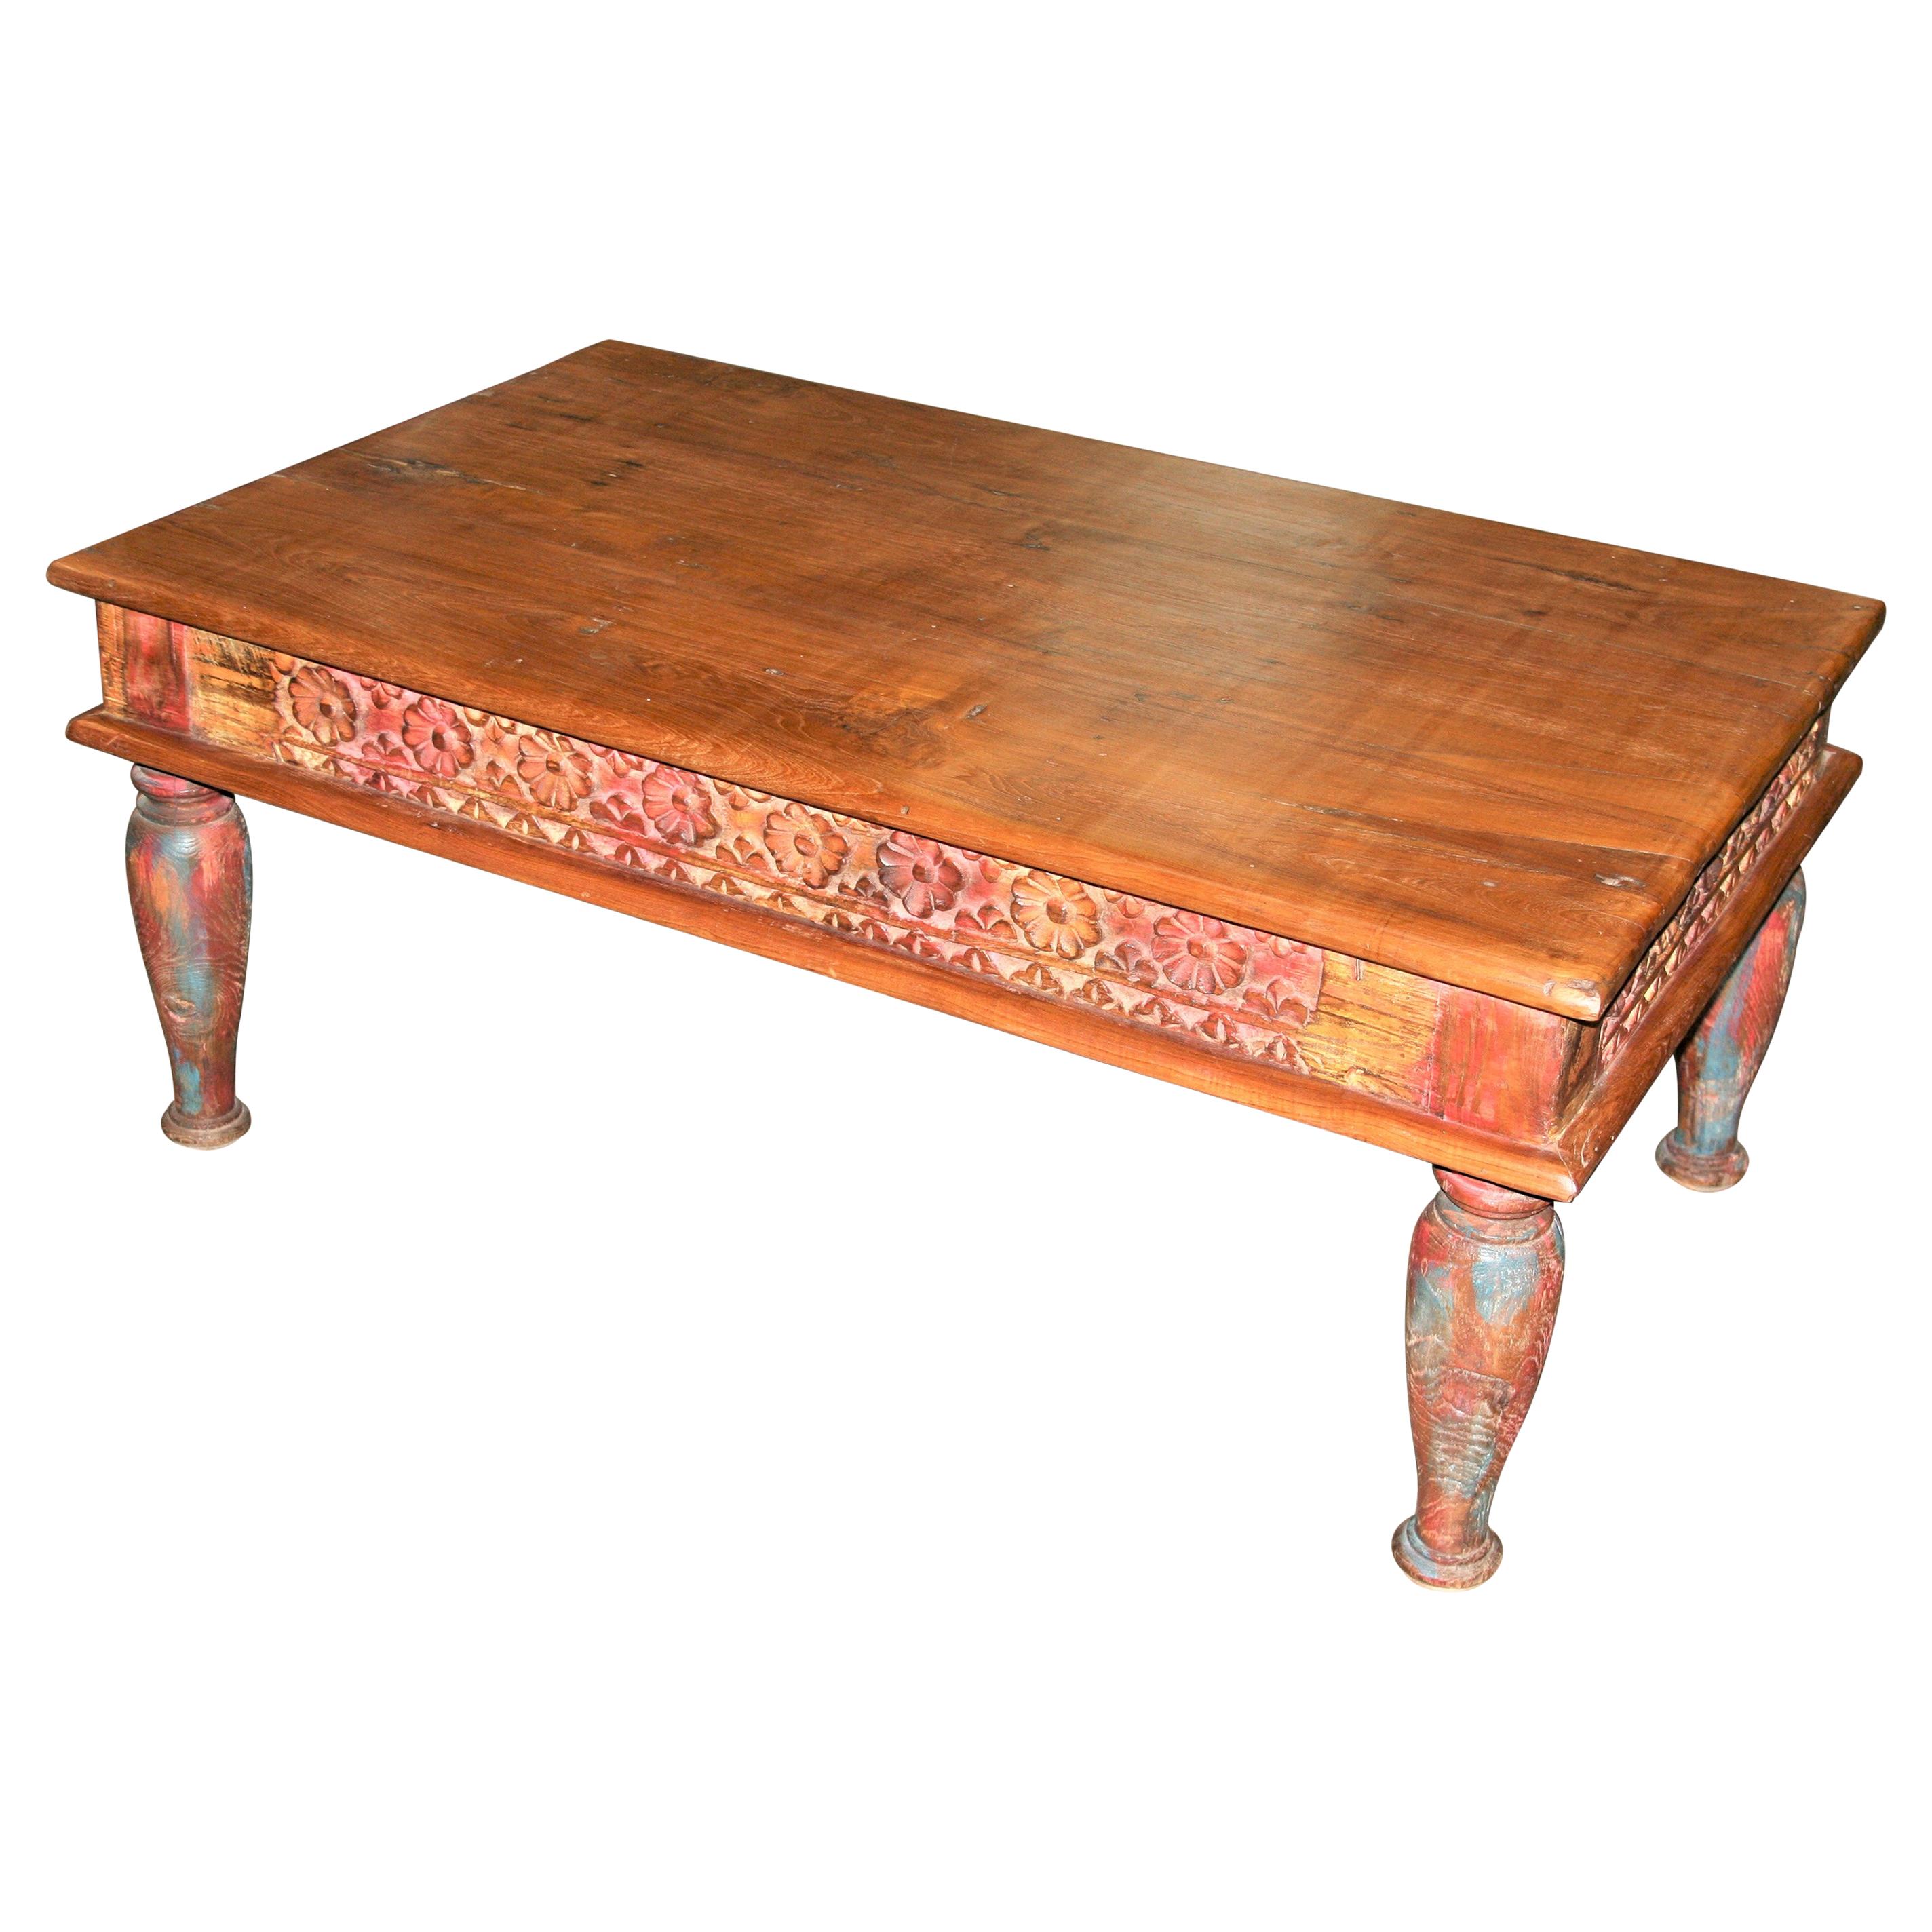 Early 20th Century Solid Teak Wood Highly Carved Coffee Table For Sale